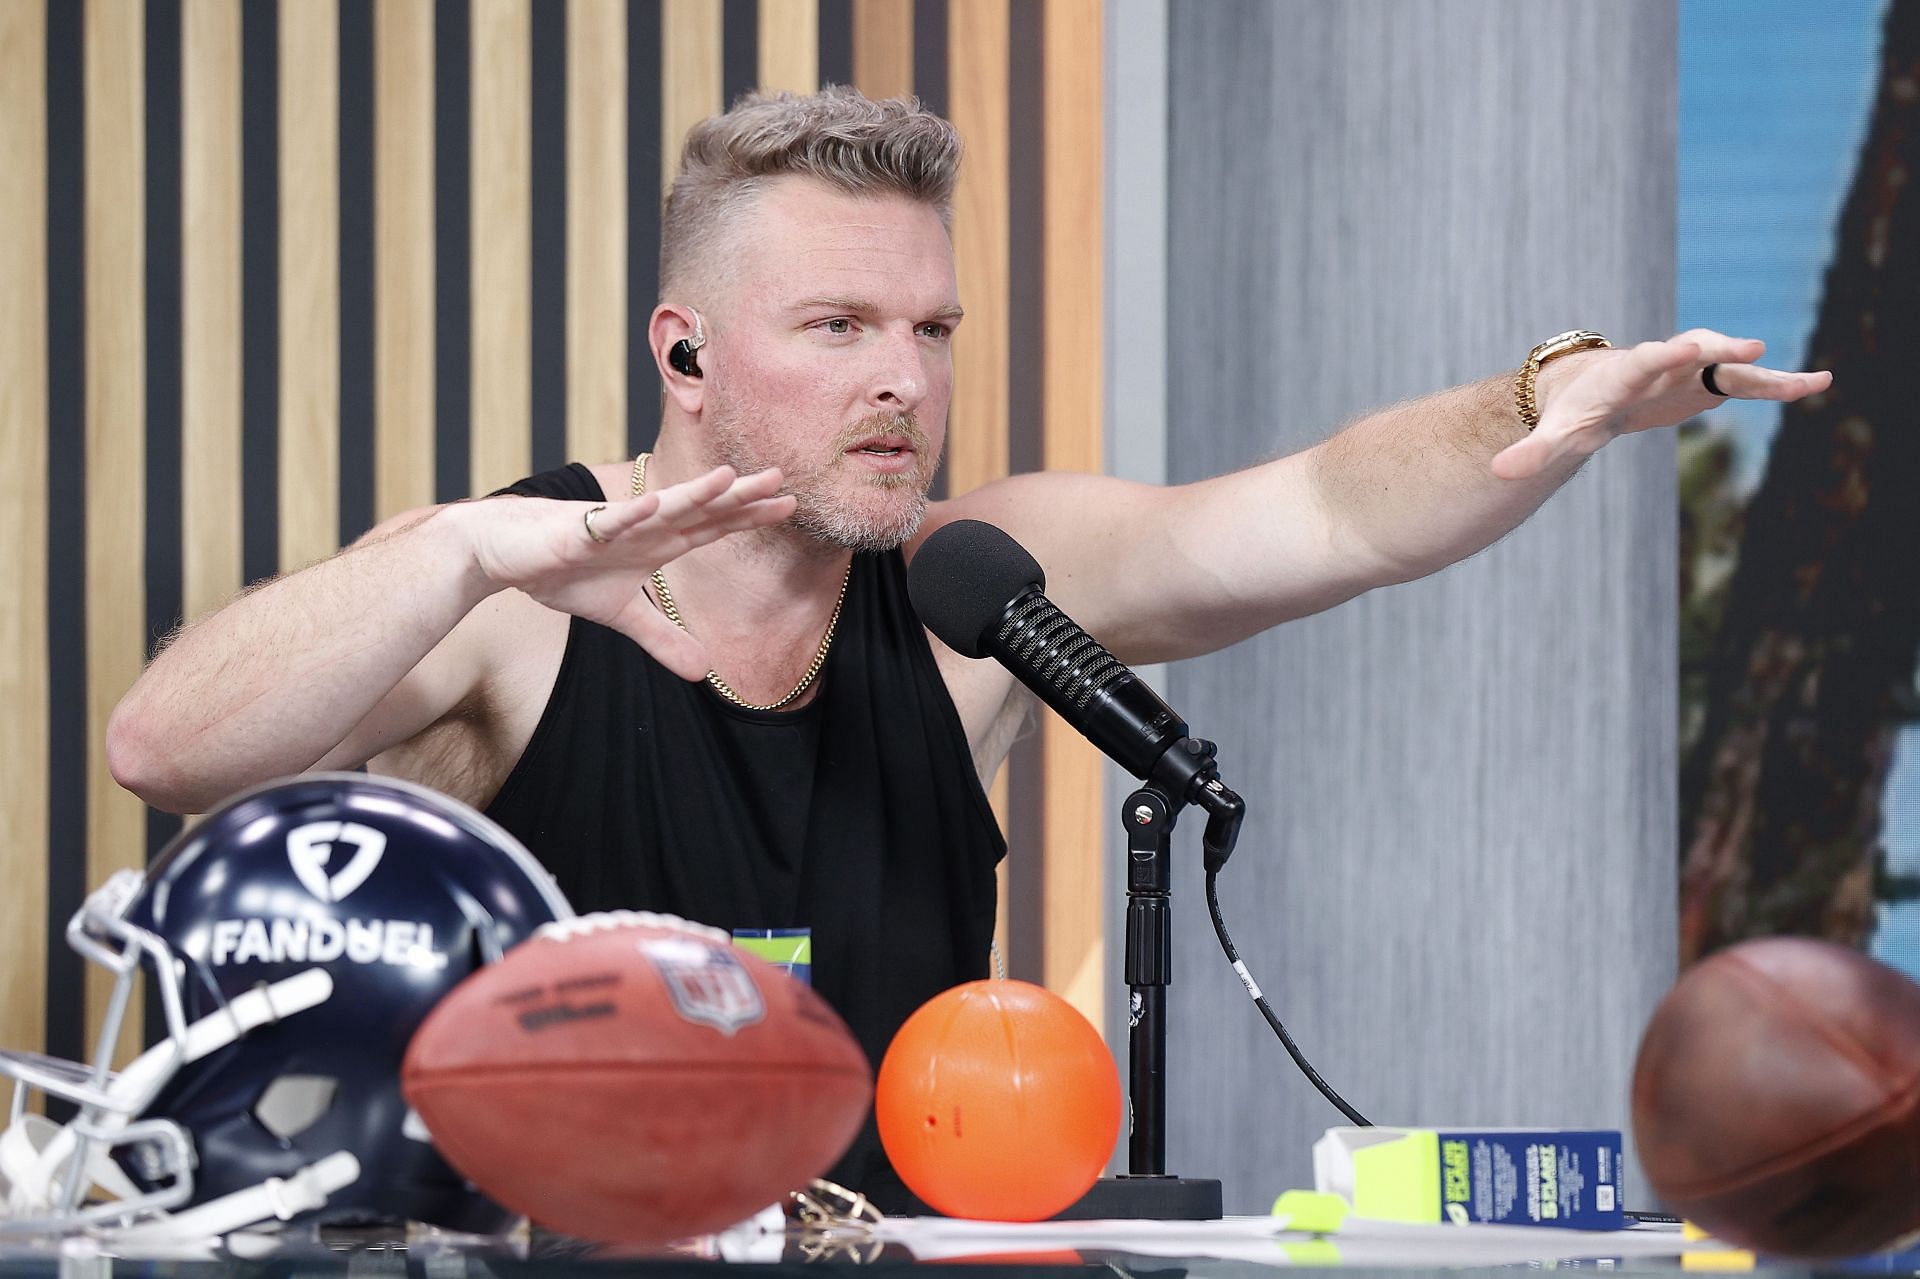 Pat McAfee is a podcaster and former NFL player